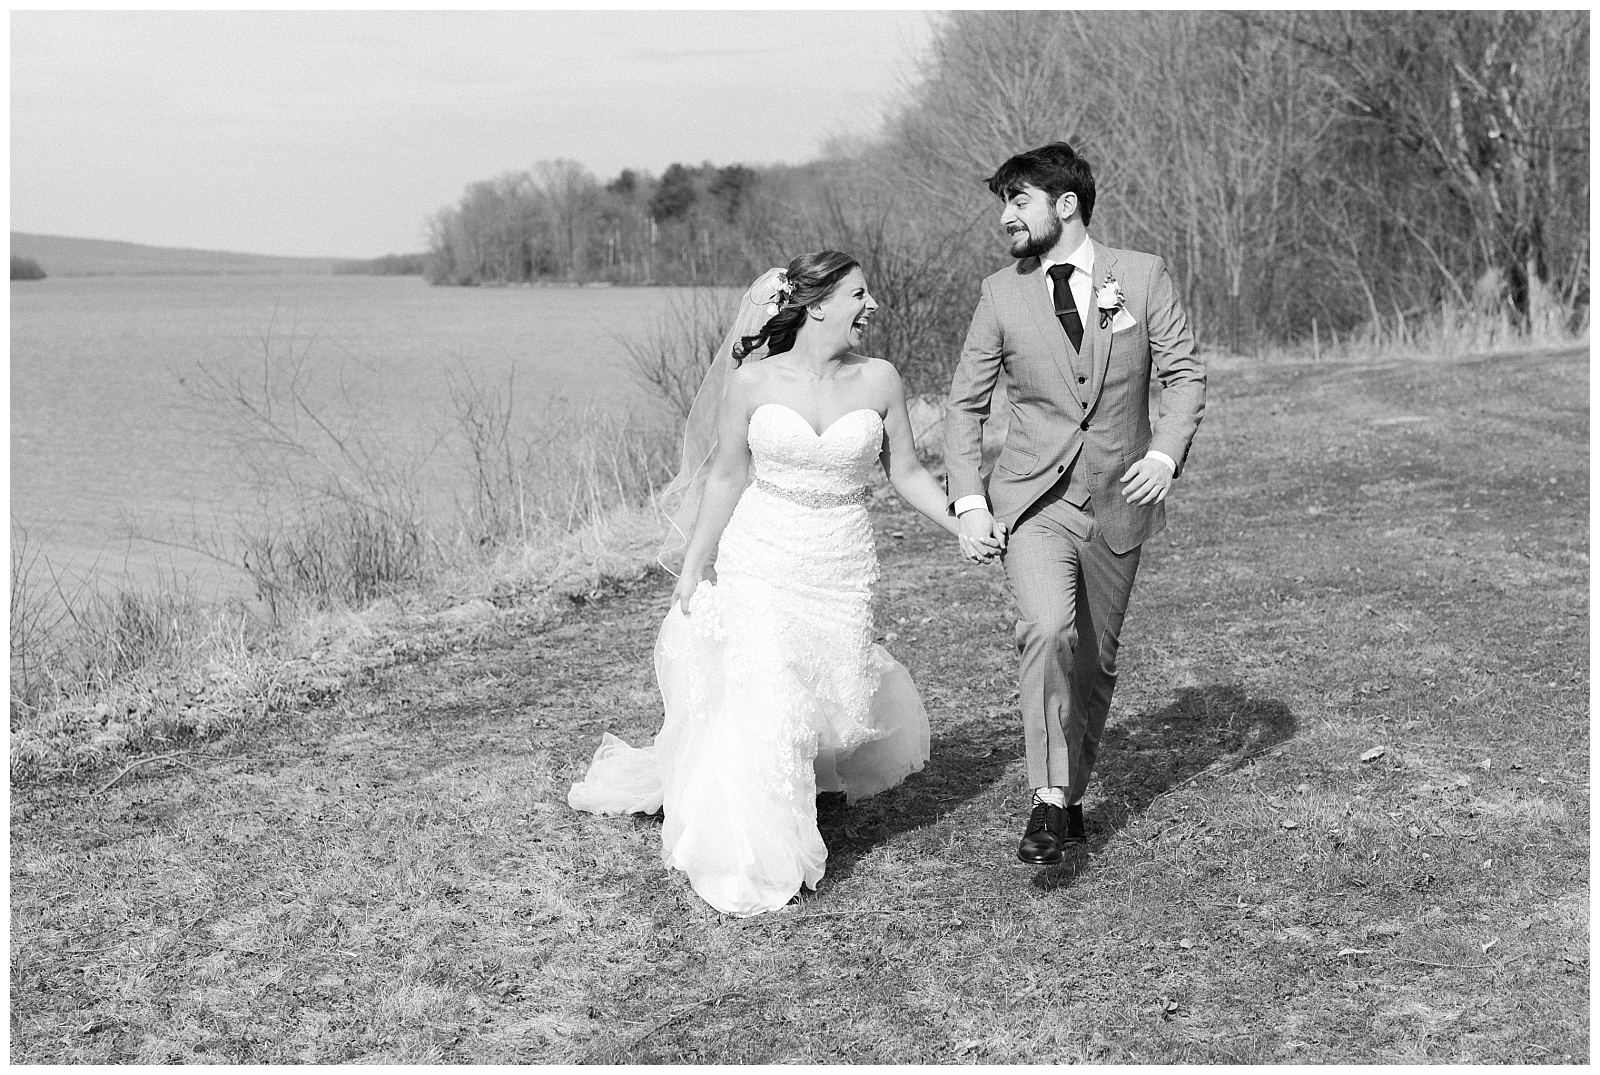 Black and white portrait of a bride and groom running next to a lake in a Mark Zunino gown.